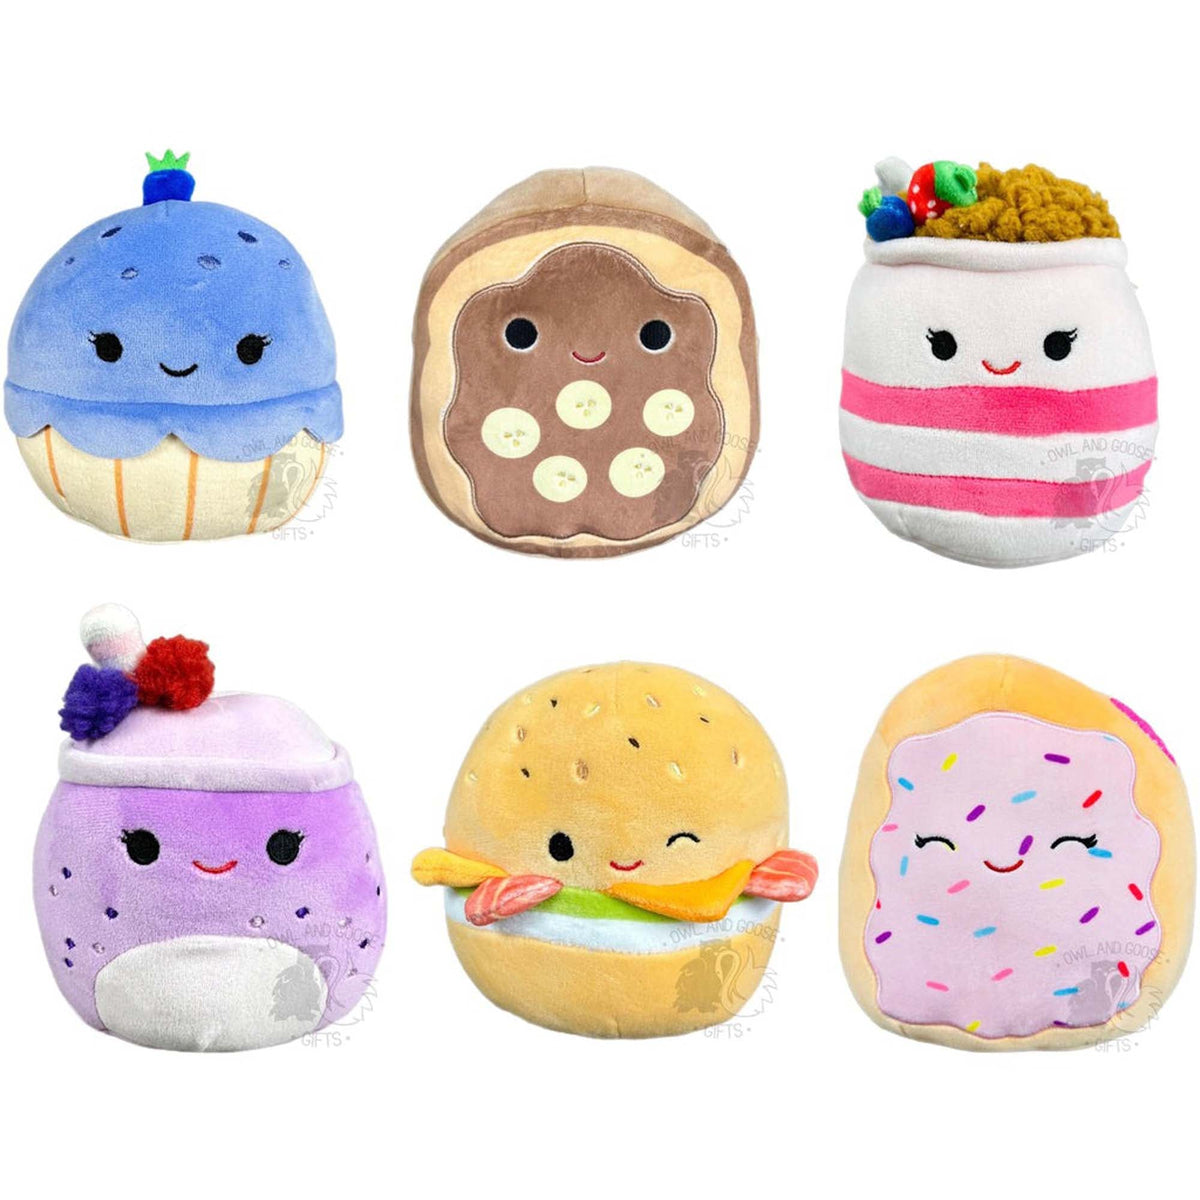 ROYAL SPECIALTY SALES Plushes Breakfast Squad Squishmallow Plush, 5 Inches, Assortment, 1 Count 096566210059